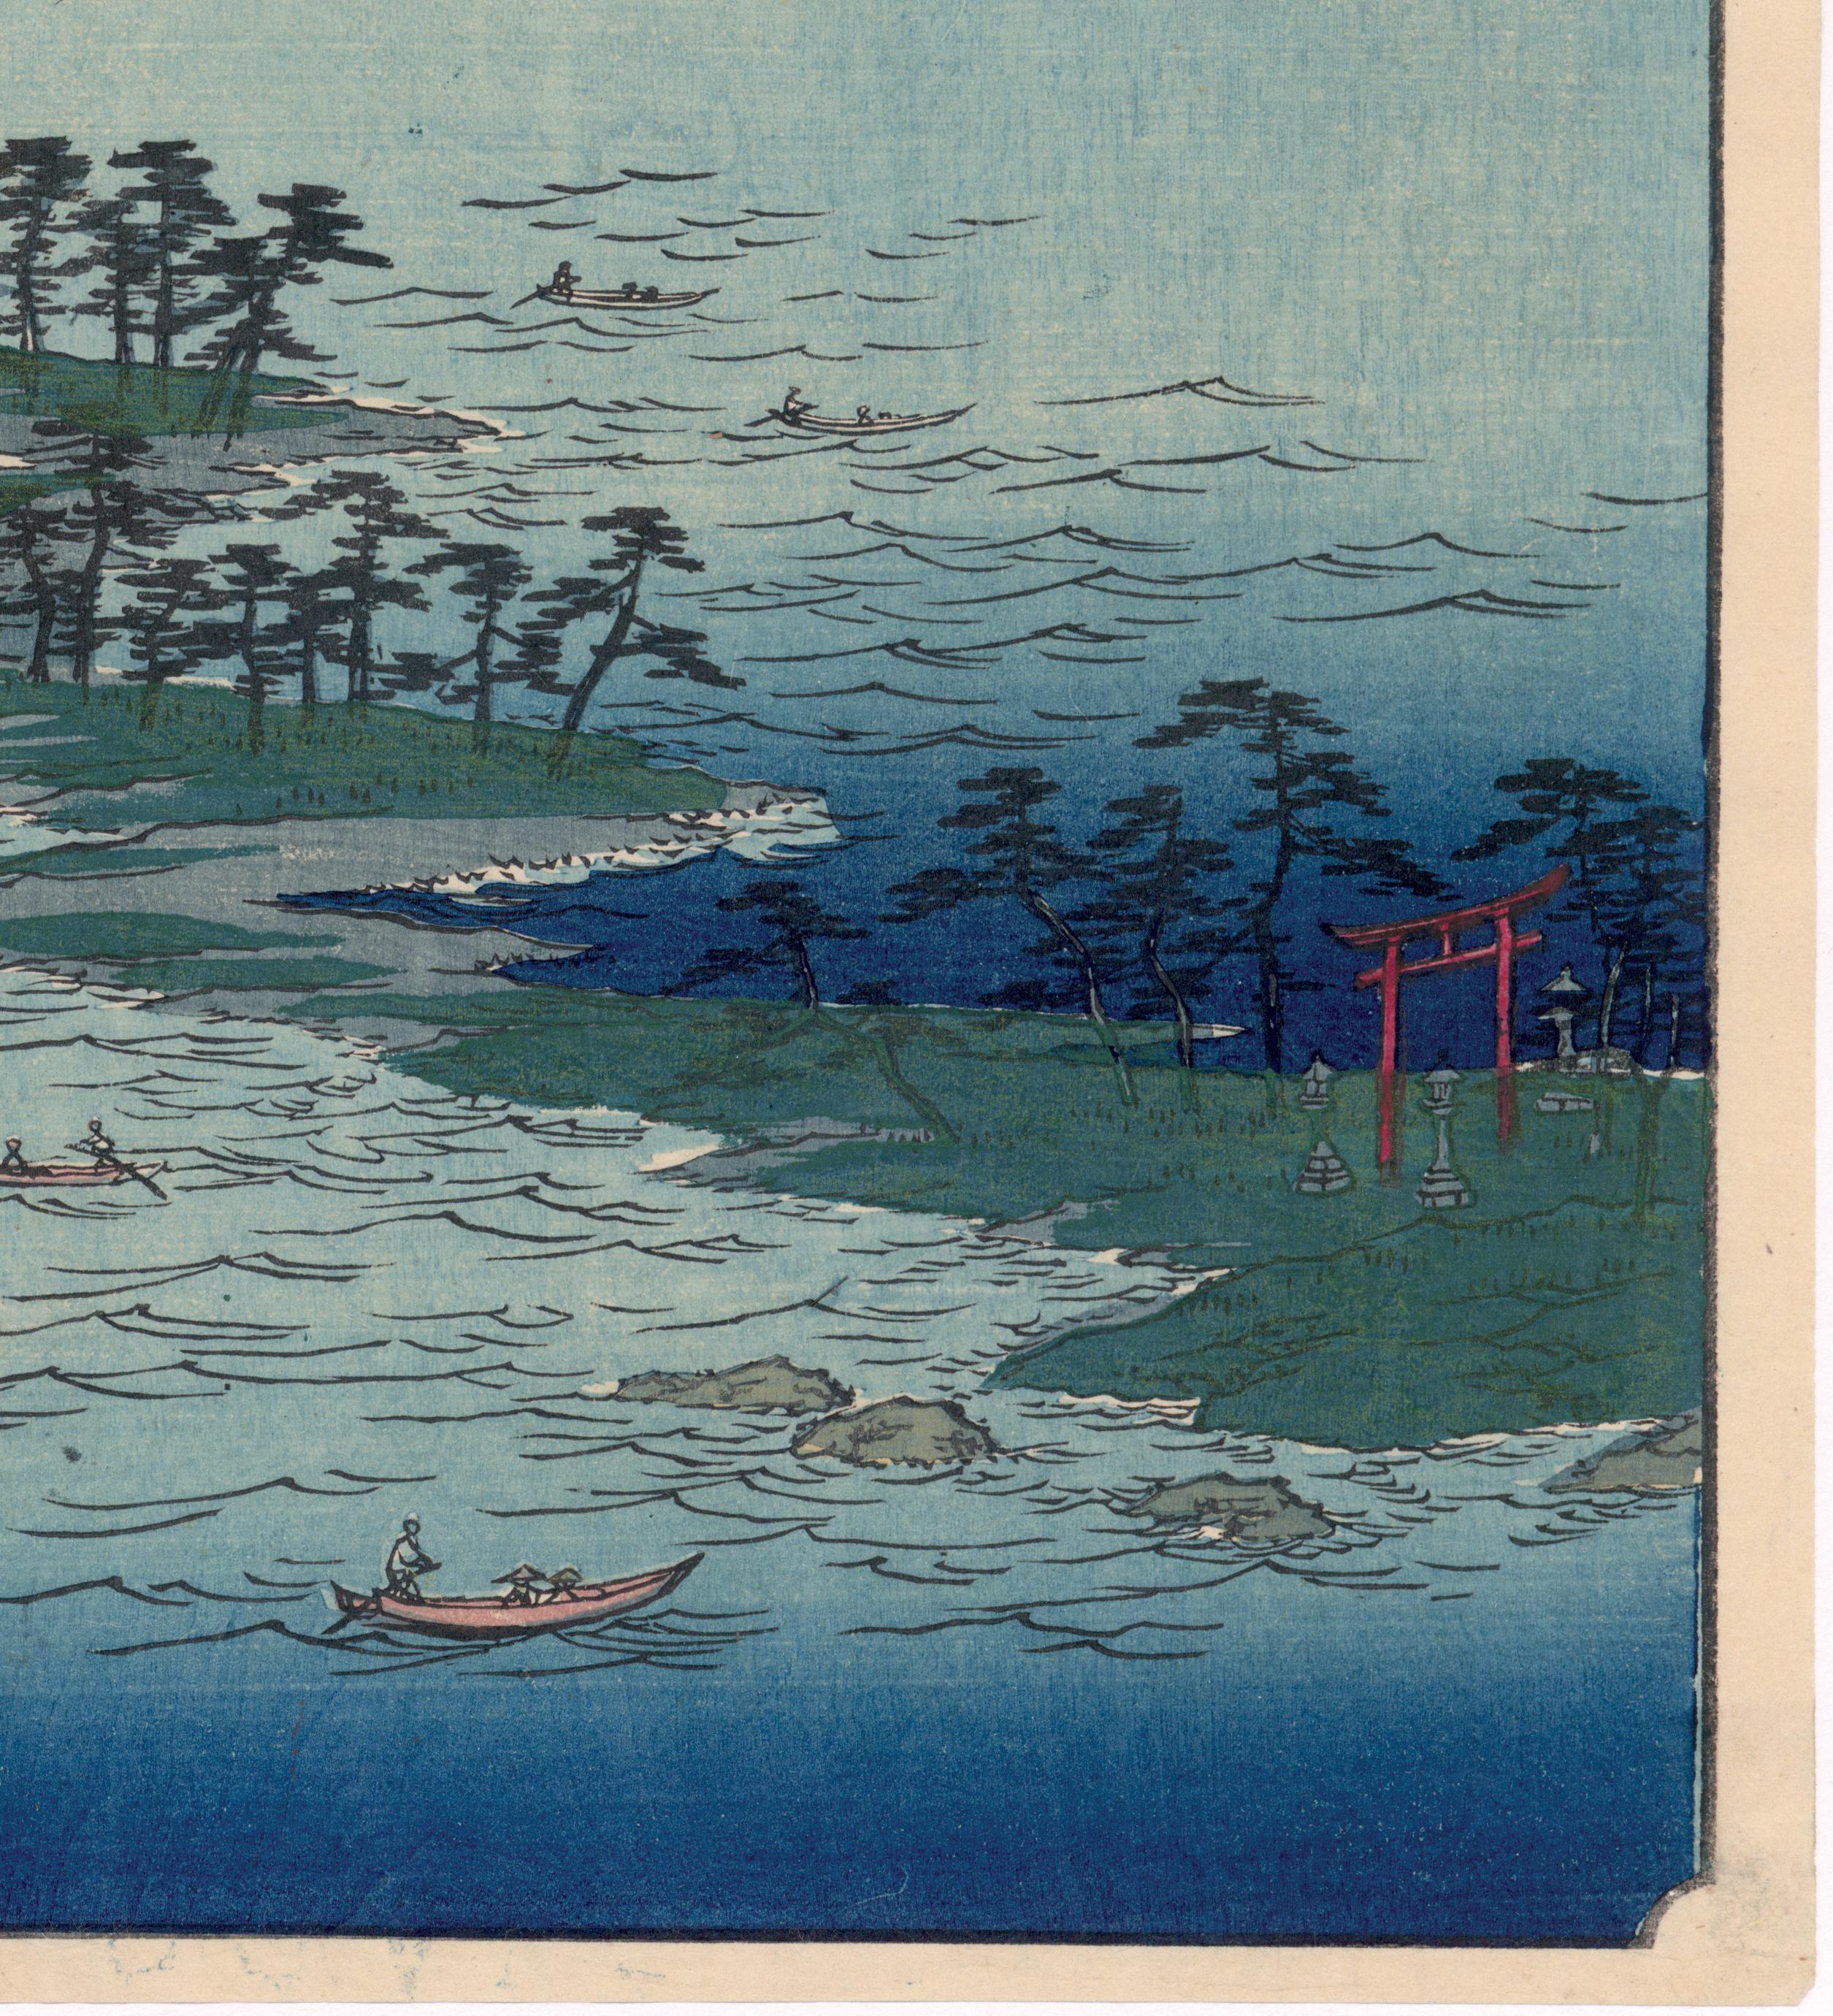 Province Chikuzen: Picture of Sea at Hakozaki, Umi no Nakamichi (Chikuzen: Hakozaki, Umi no nakamichi). The sandy peninsula depicted in this print is the “Path in the Middle of the Sea” (Umi no nakamichi) with the village Akozaki to the left and the